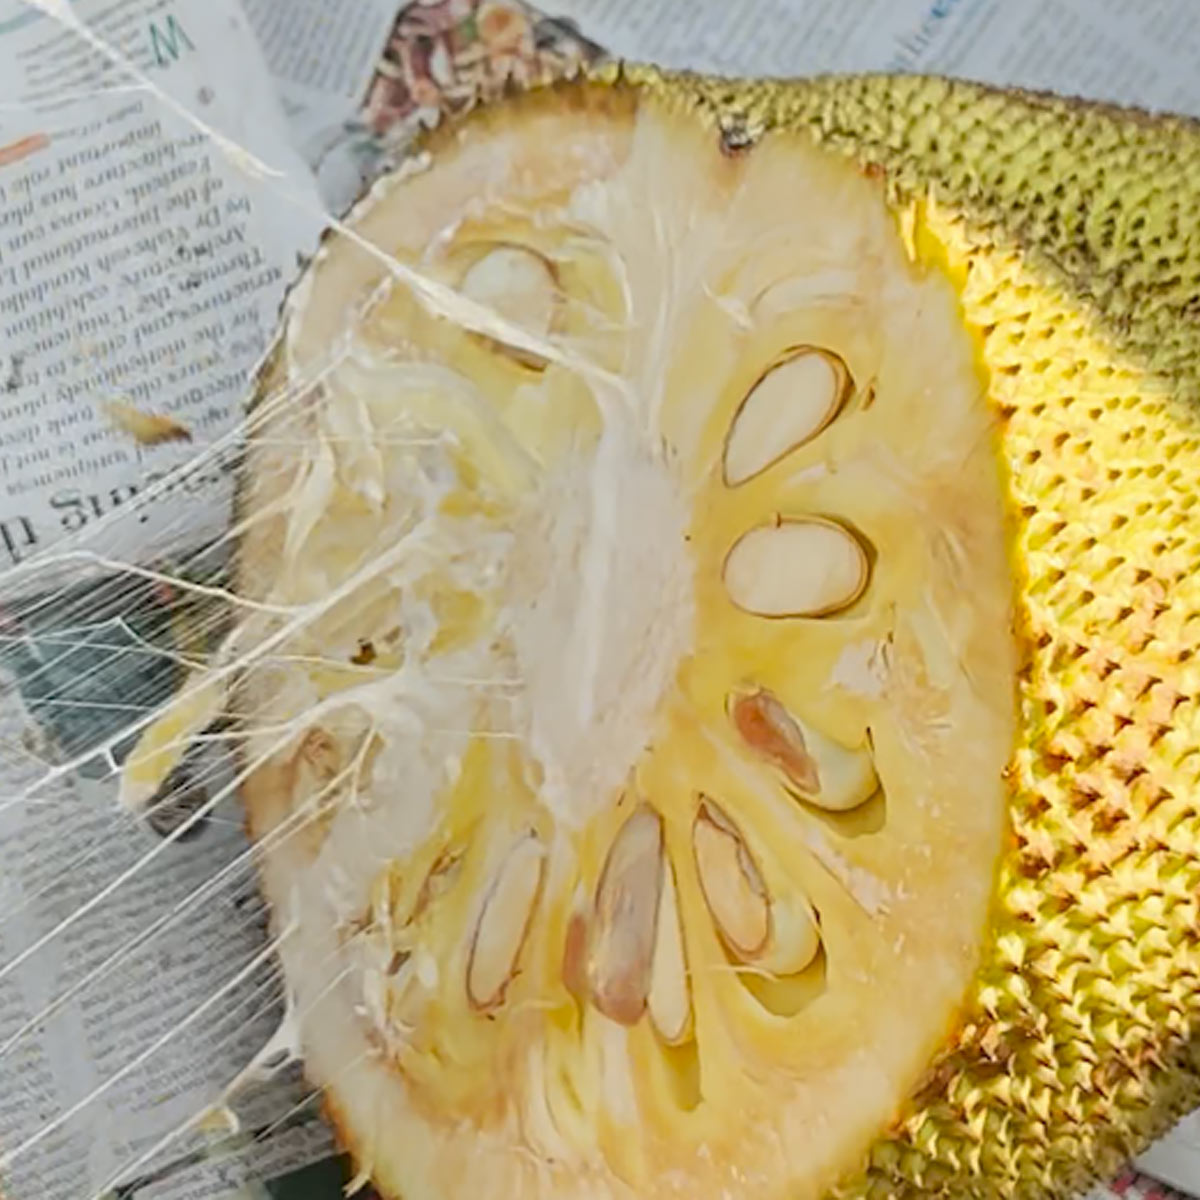 A freshly cut jackfruit with sticky sap oozing out